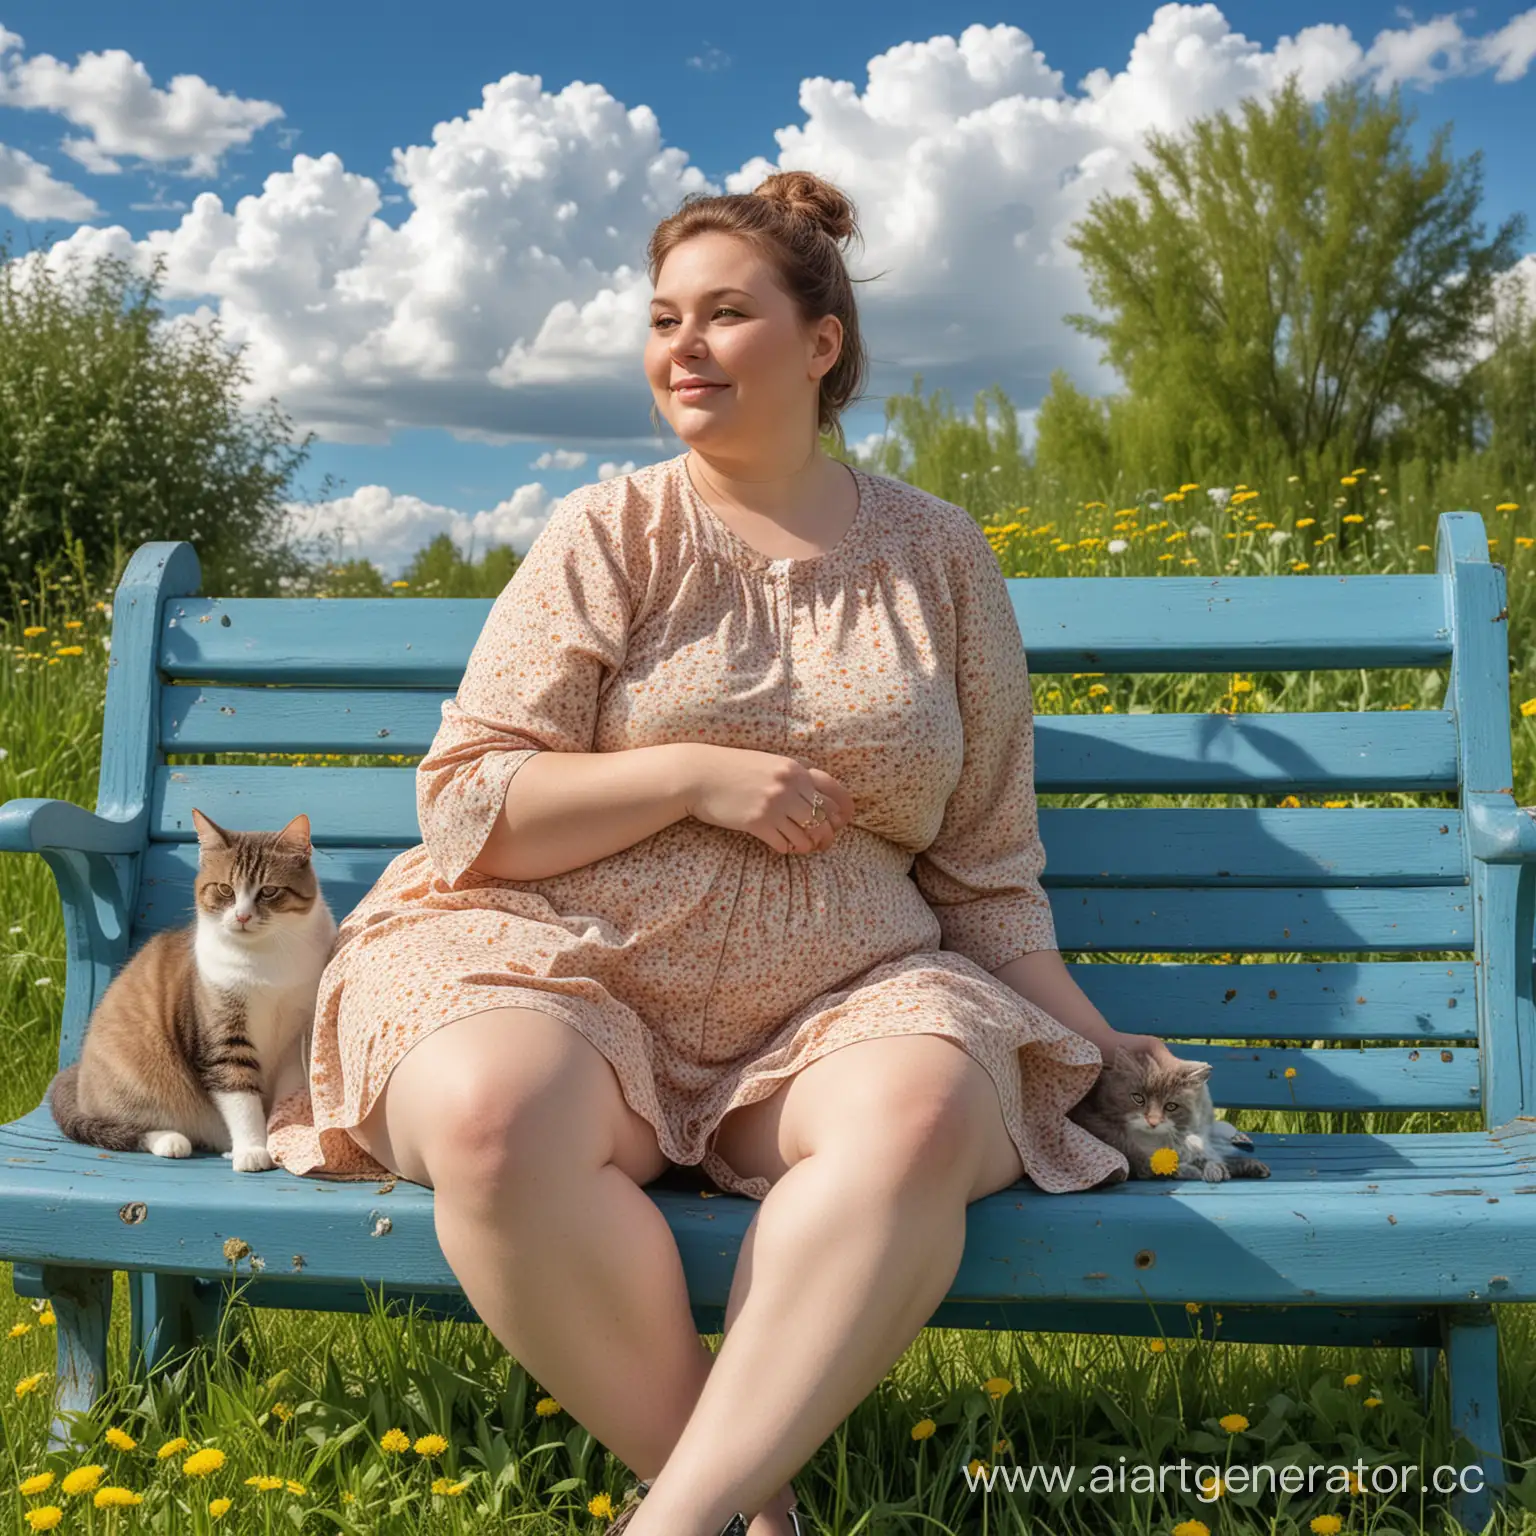 Spring-Portrait-of-Playful-Lady-with-Cat-on-Blue-Bench